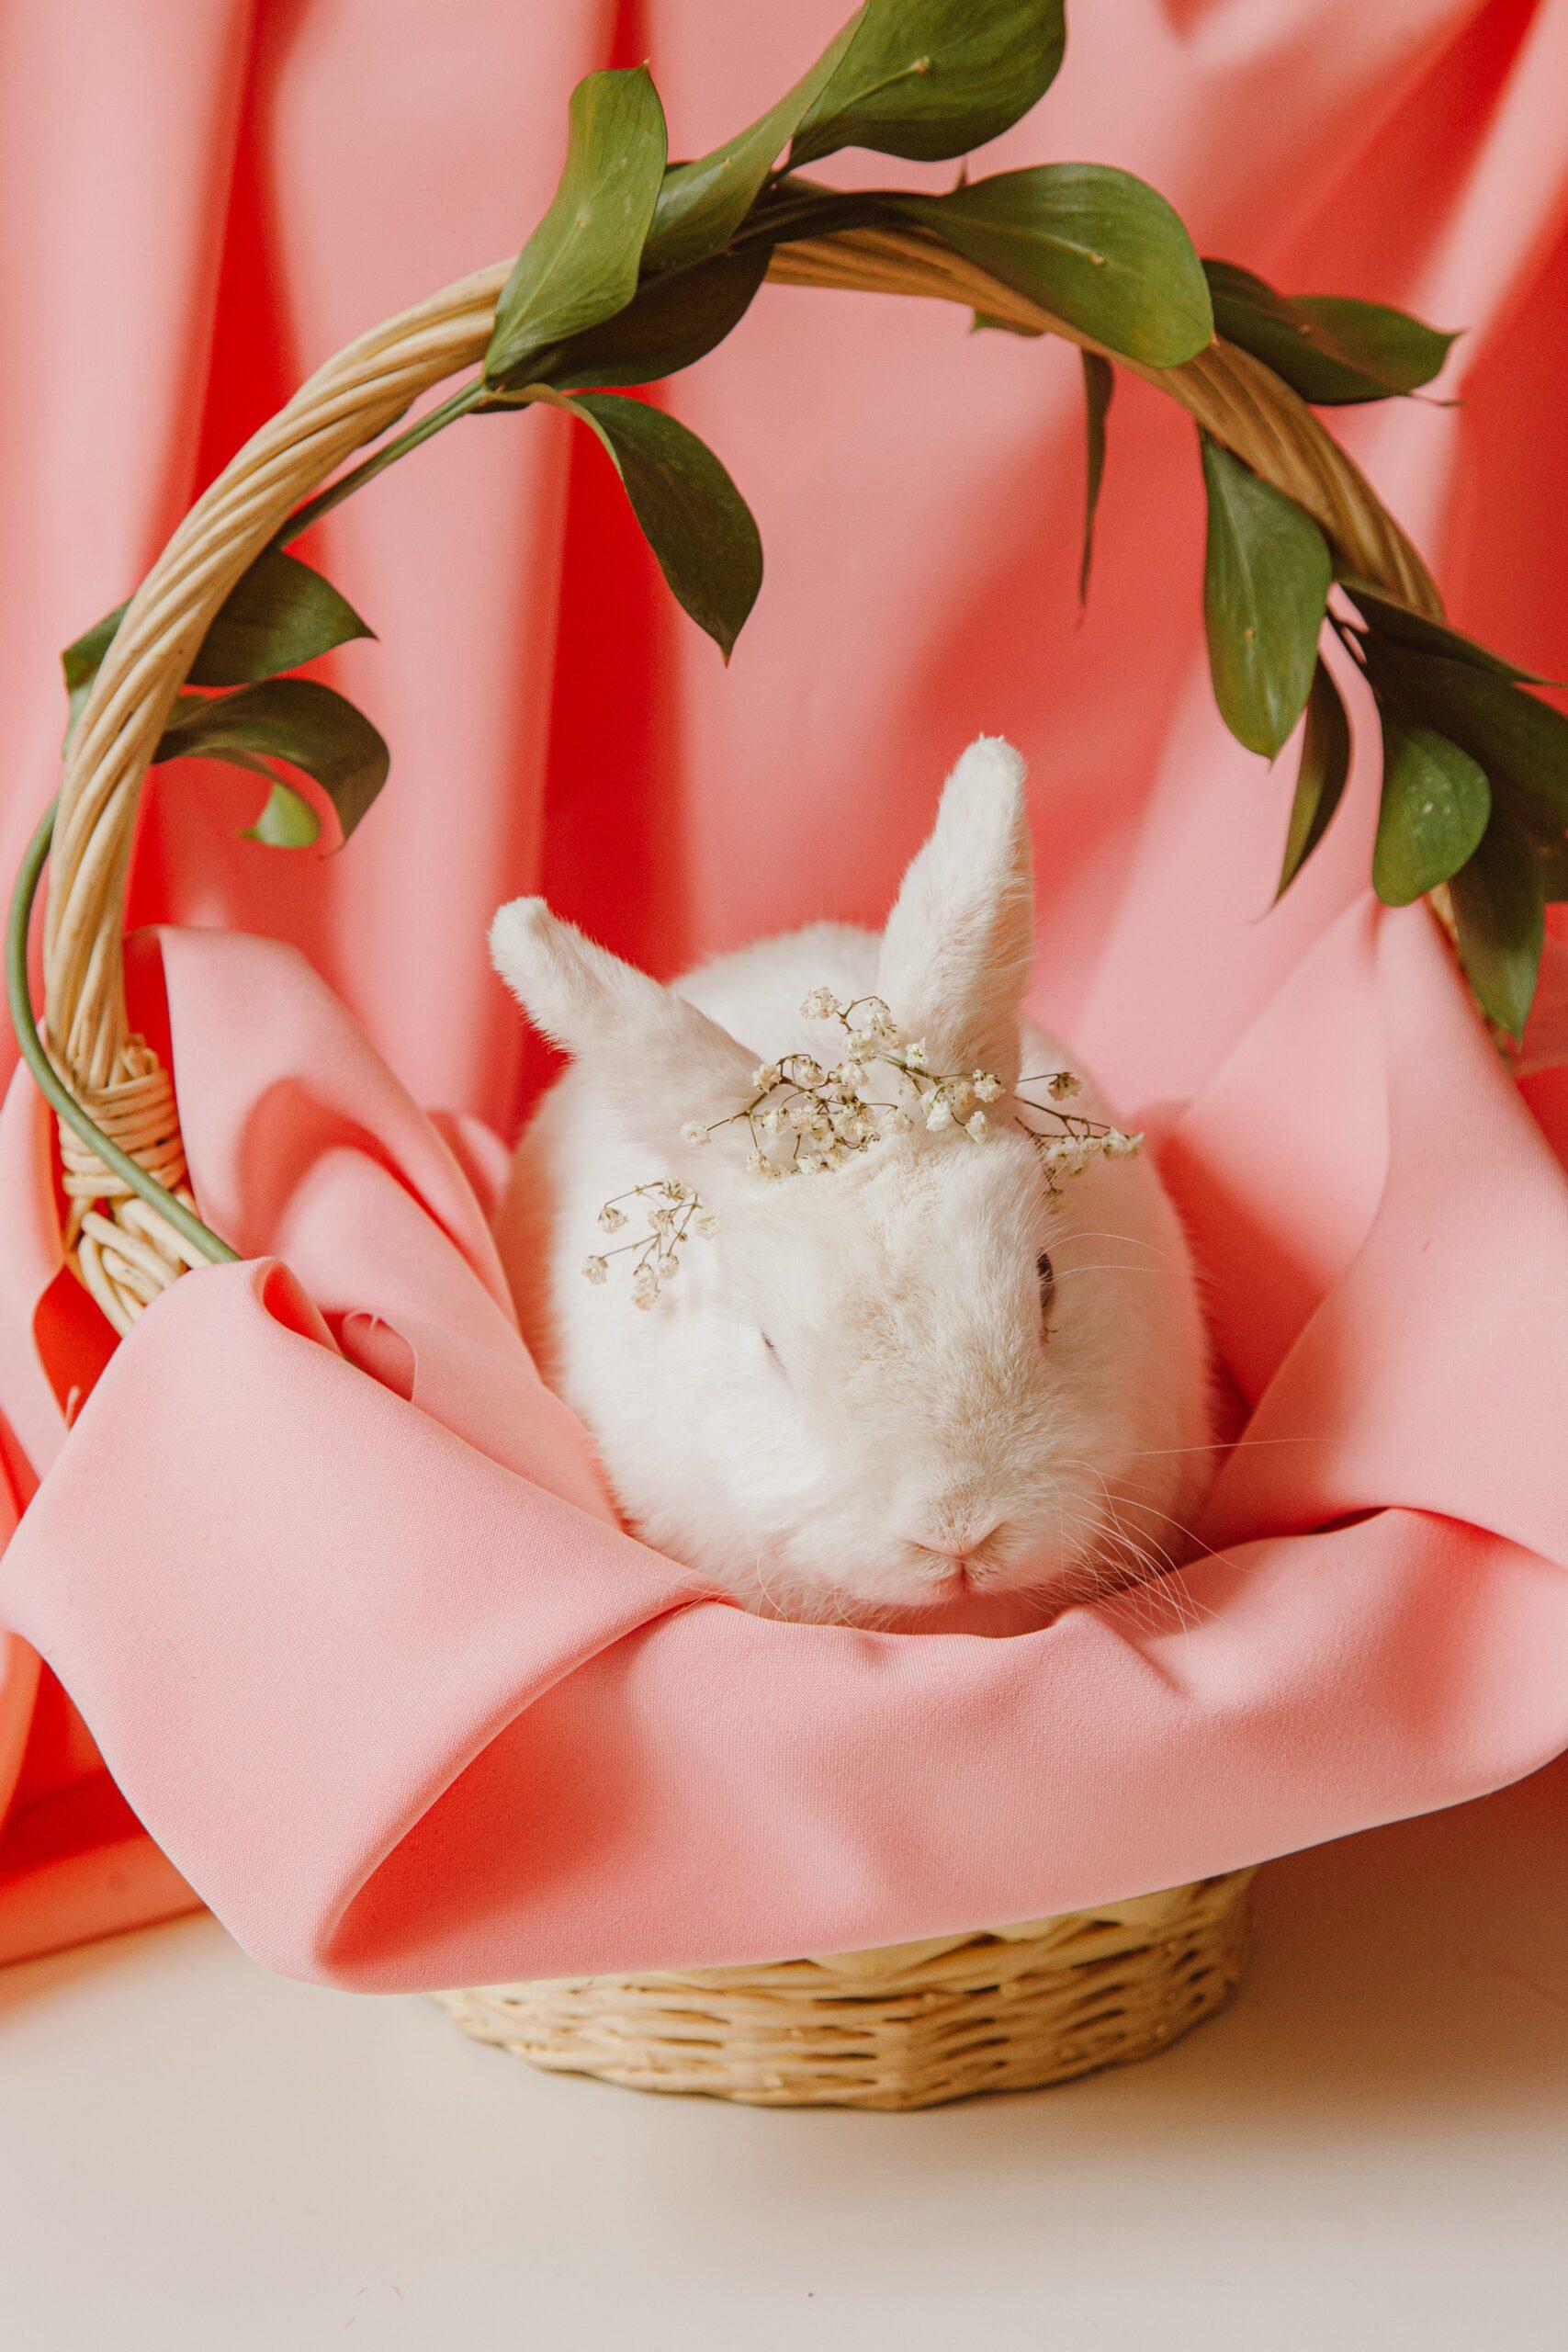 An Easter bunny sitting in an Easter basket with a pink sheet under it. The bunny has a baby's breath crown